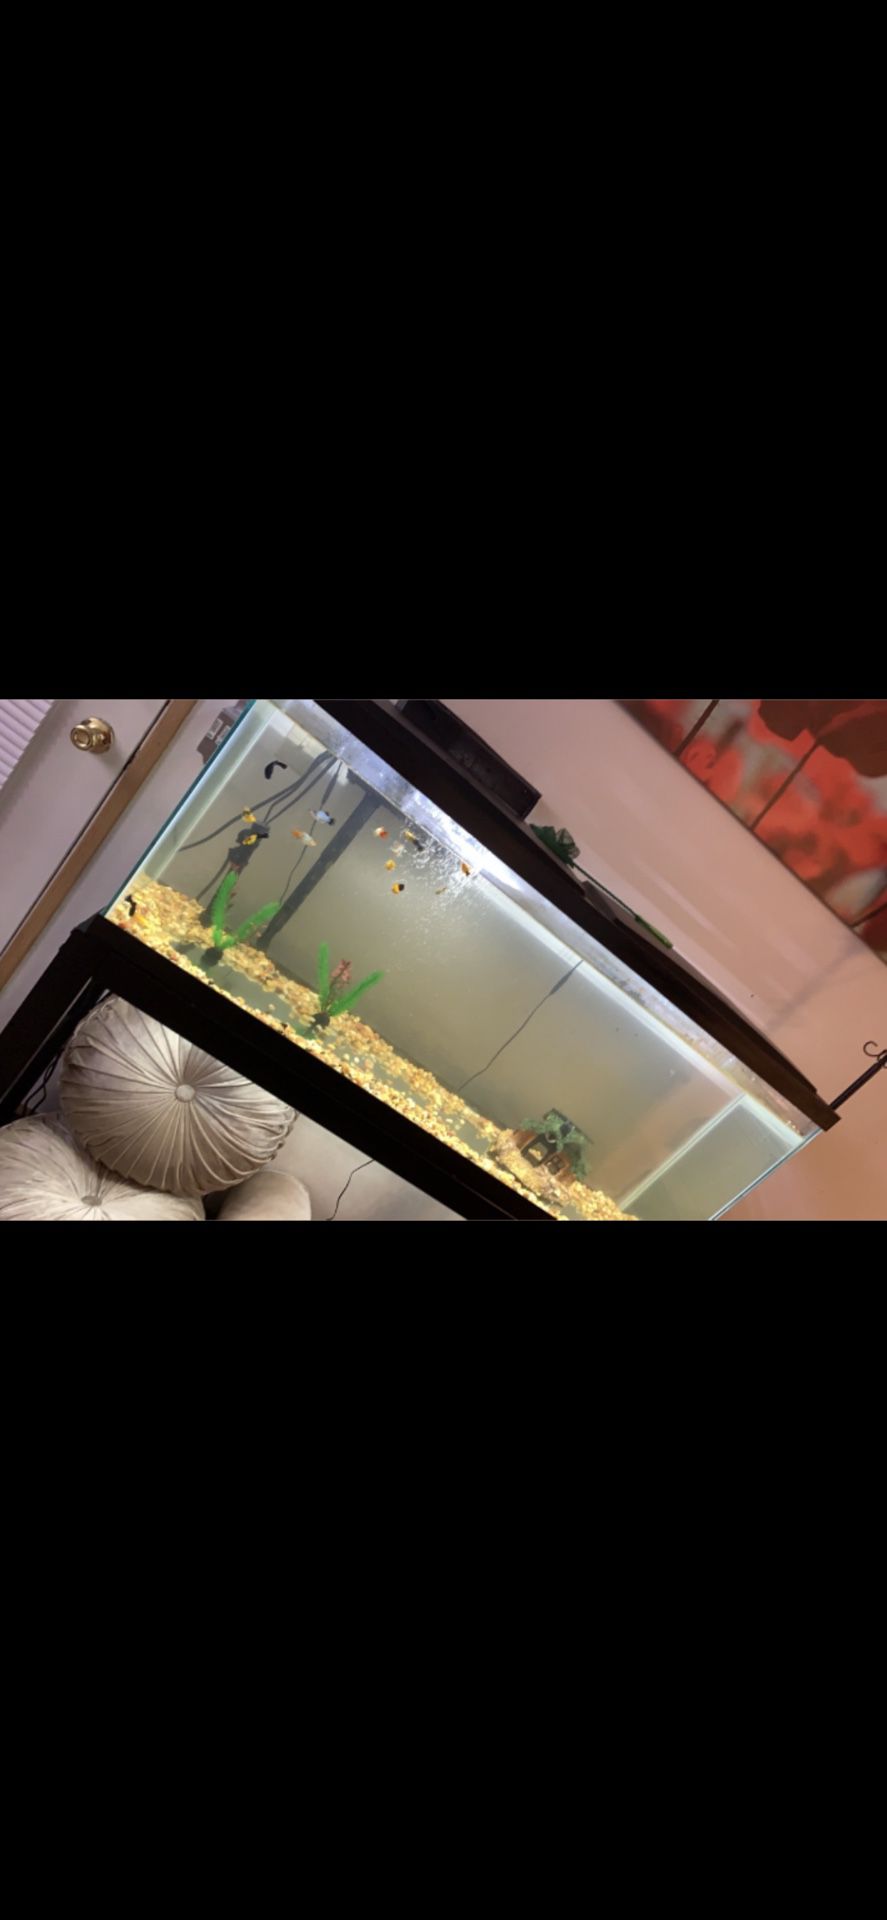 Aquarium 55 Gallons , stand and Marineland , Magniflow 360 gph canisters filter $250 Vancouver,WA